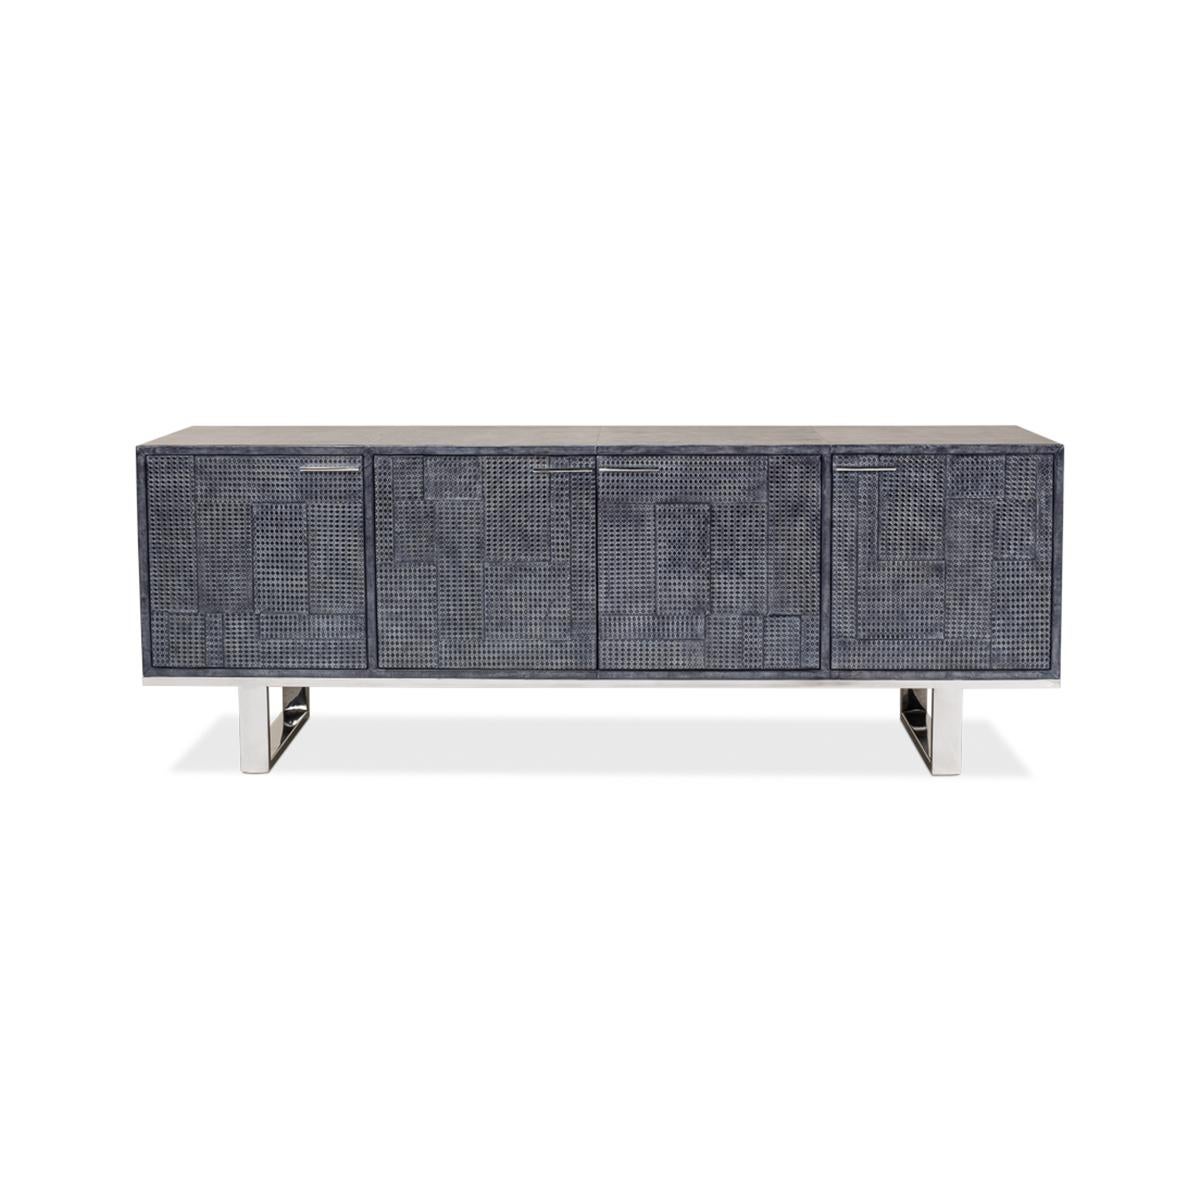 Modern Italian leather wrapped credenza, with an embossed grey/blue leather wrapped around the four-door cabinet with a natural wood finish interior and raised on stainless steel finish iron base.

Dimensions: 94